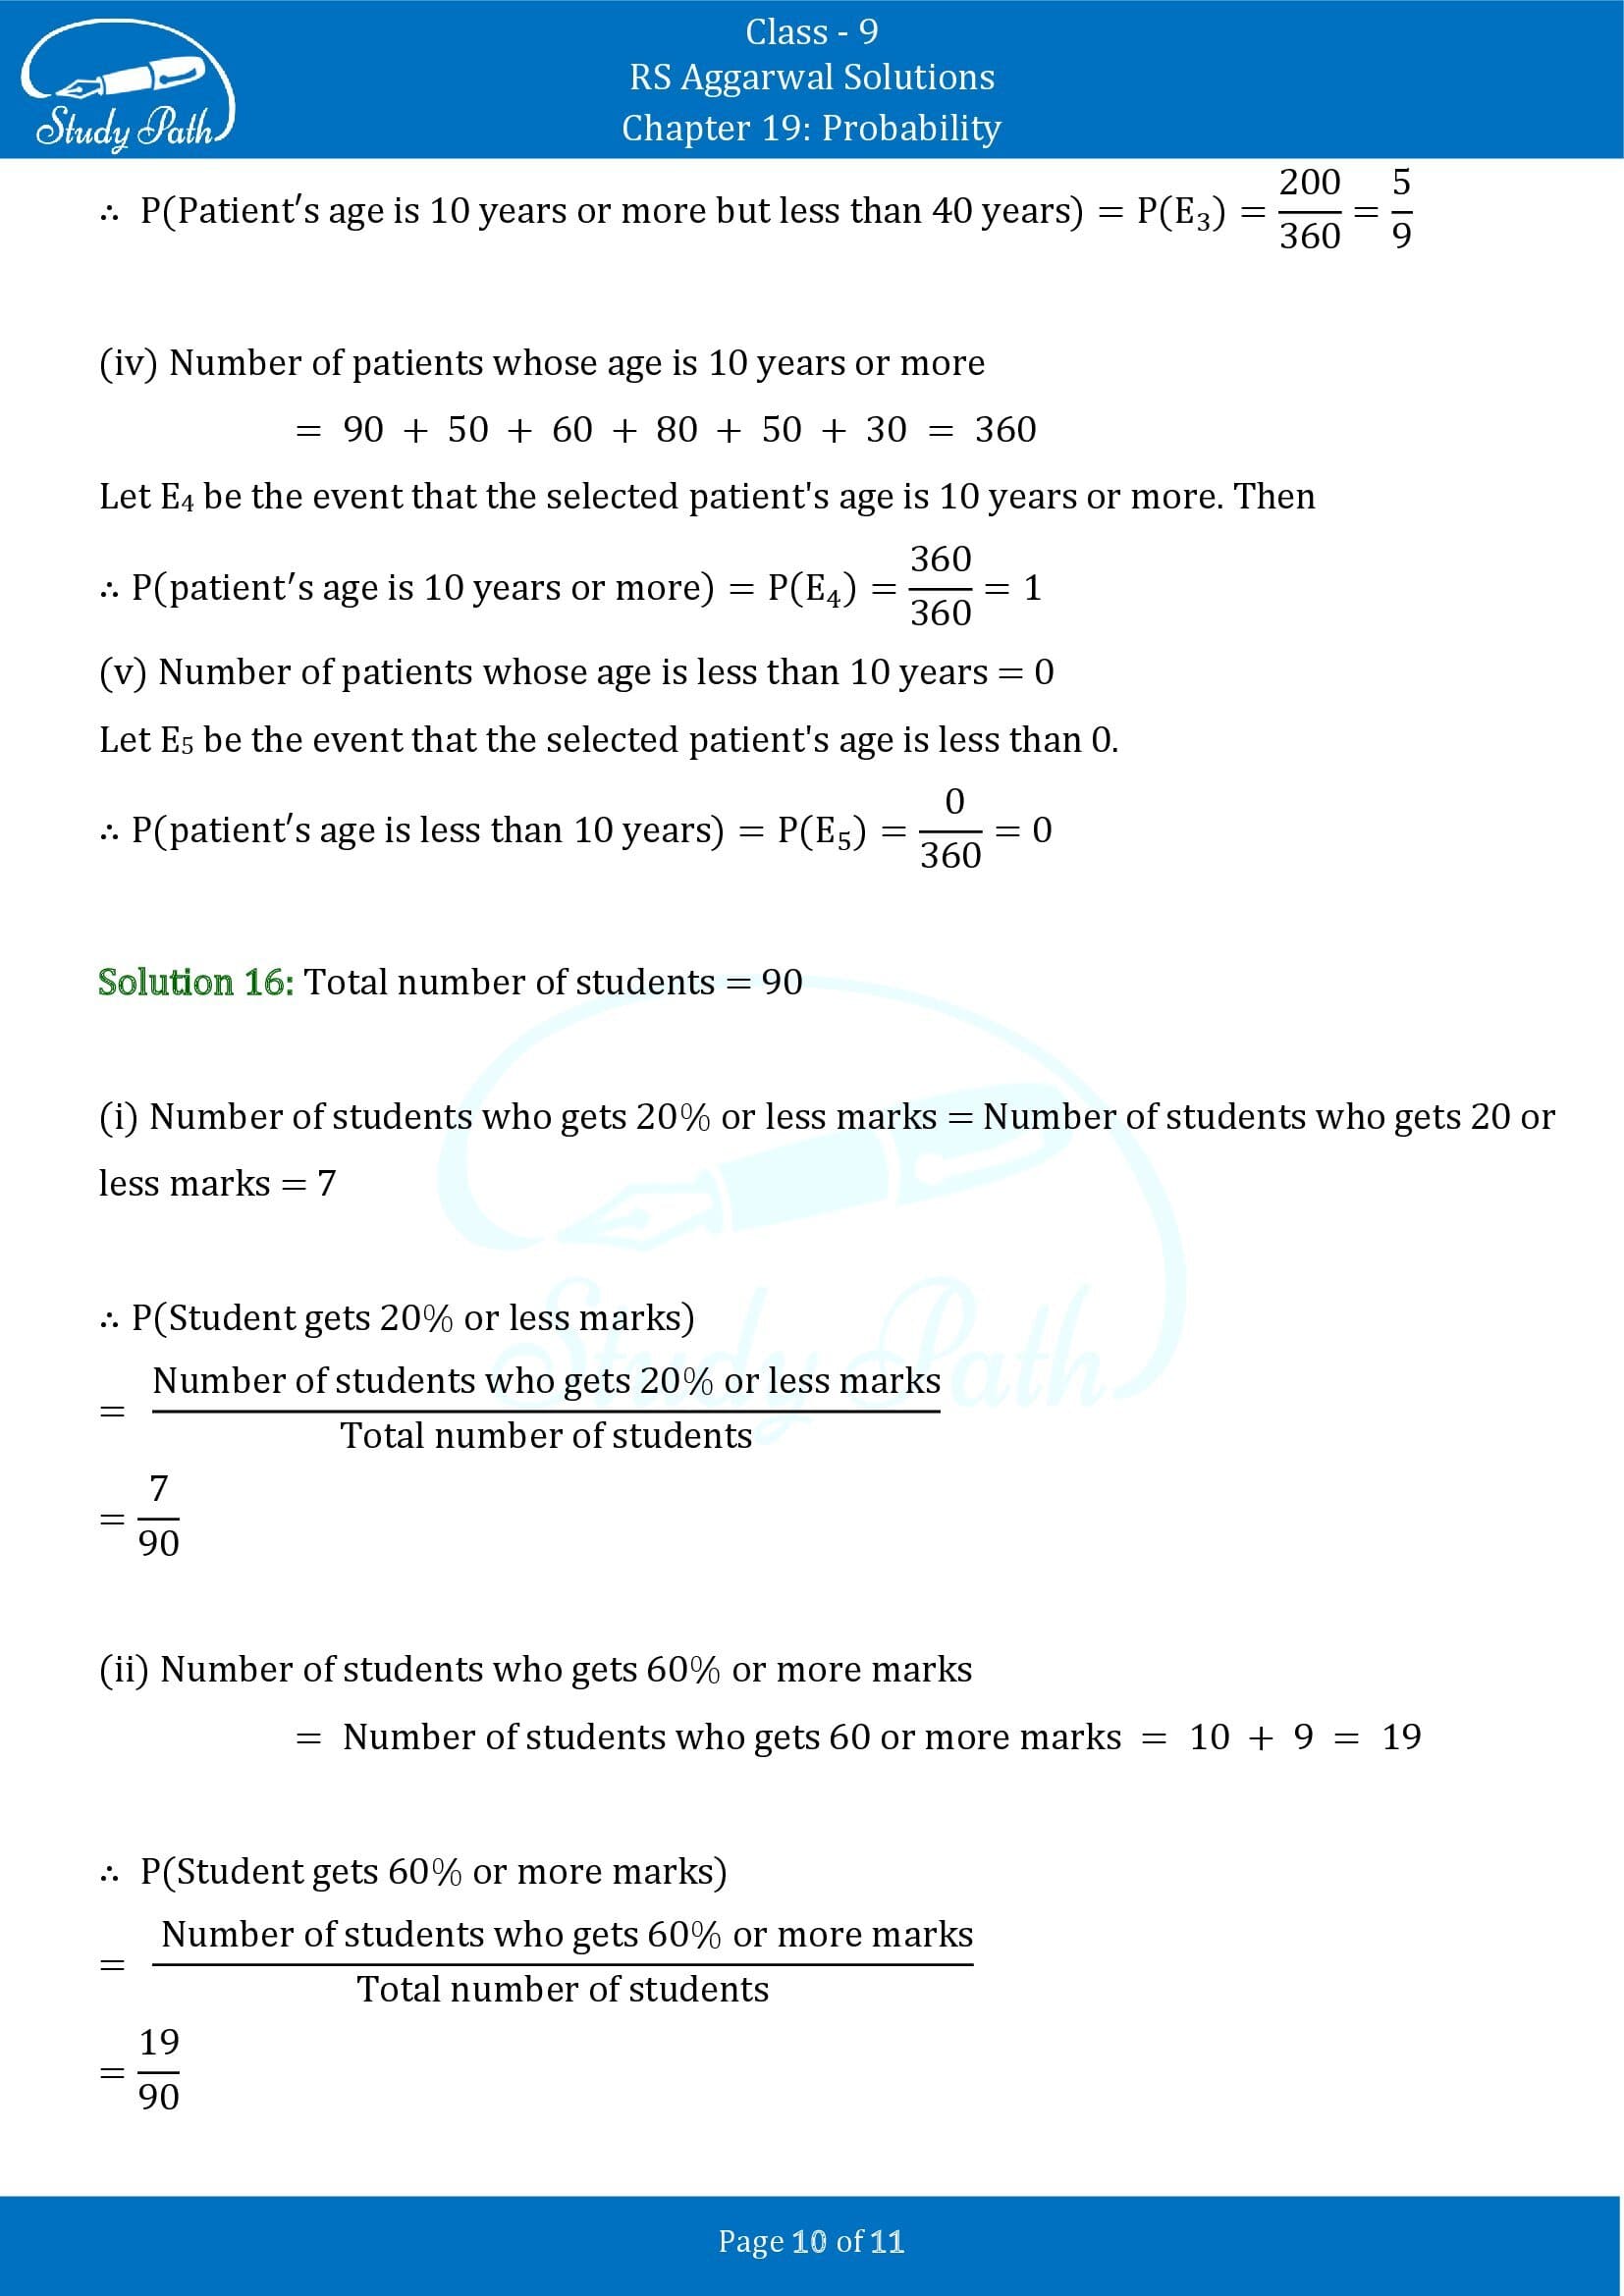 RS Aggarwal Solutions Class 9 Chapter 19 Probability Exercise 19 00010